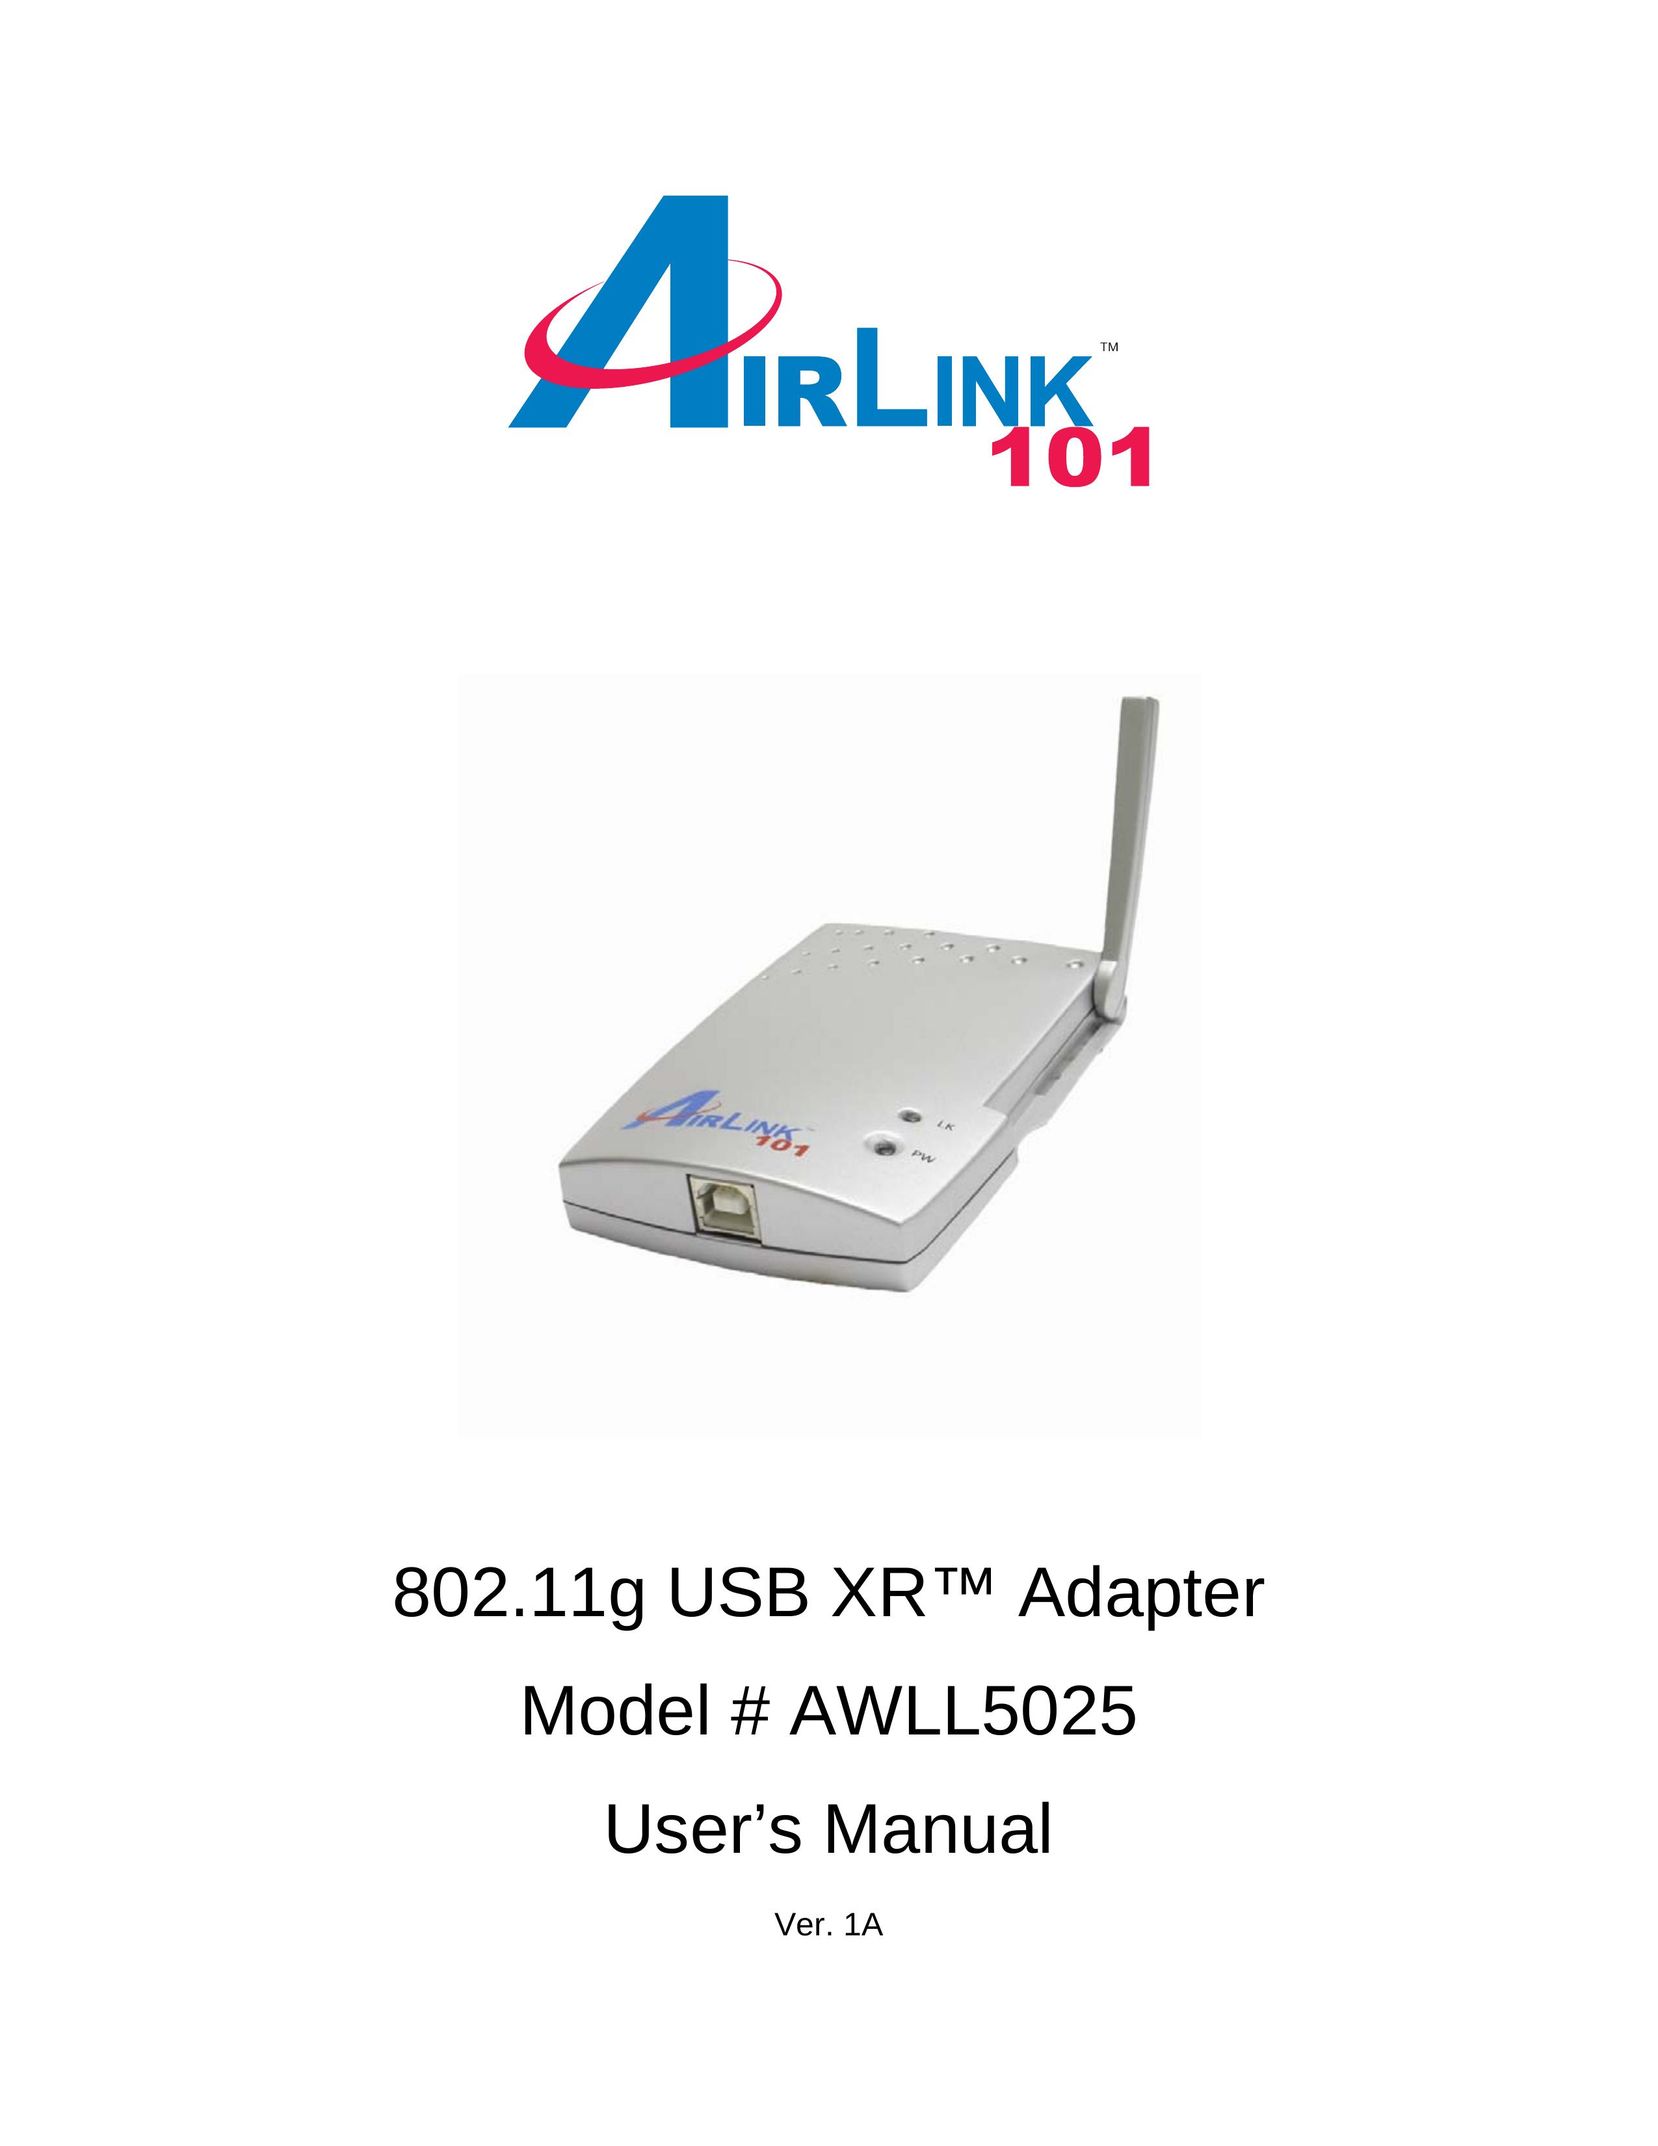 Airlink101 AWLL5025 Network Card User Manual